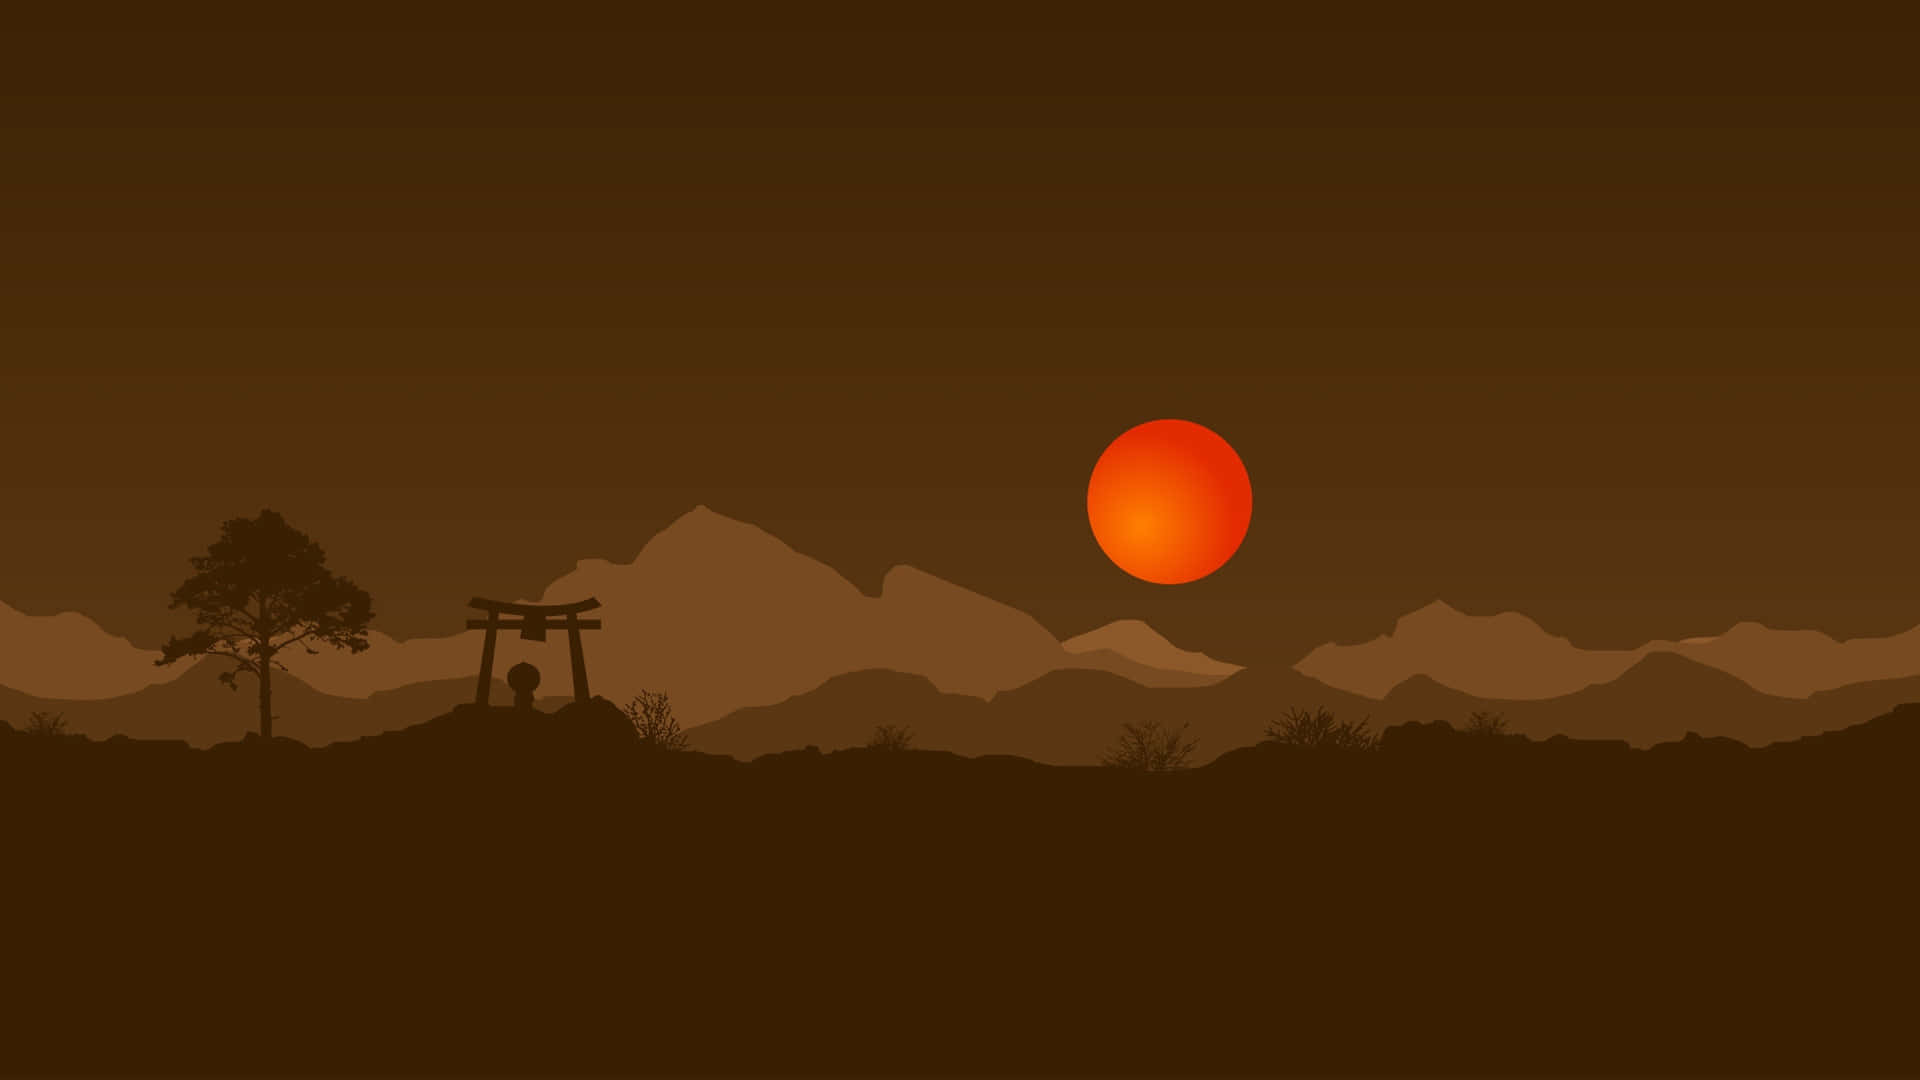 A Silhouette Of A Mountain With A Sun In The Background Background